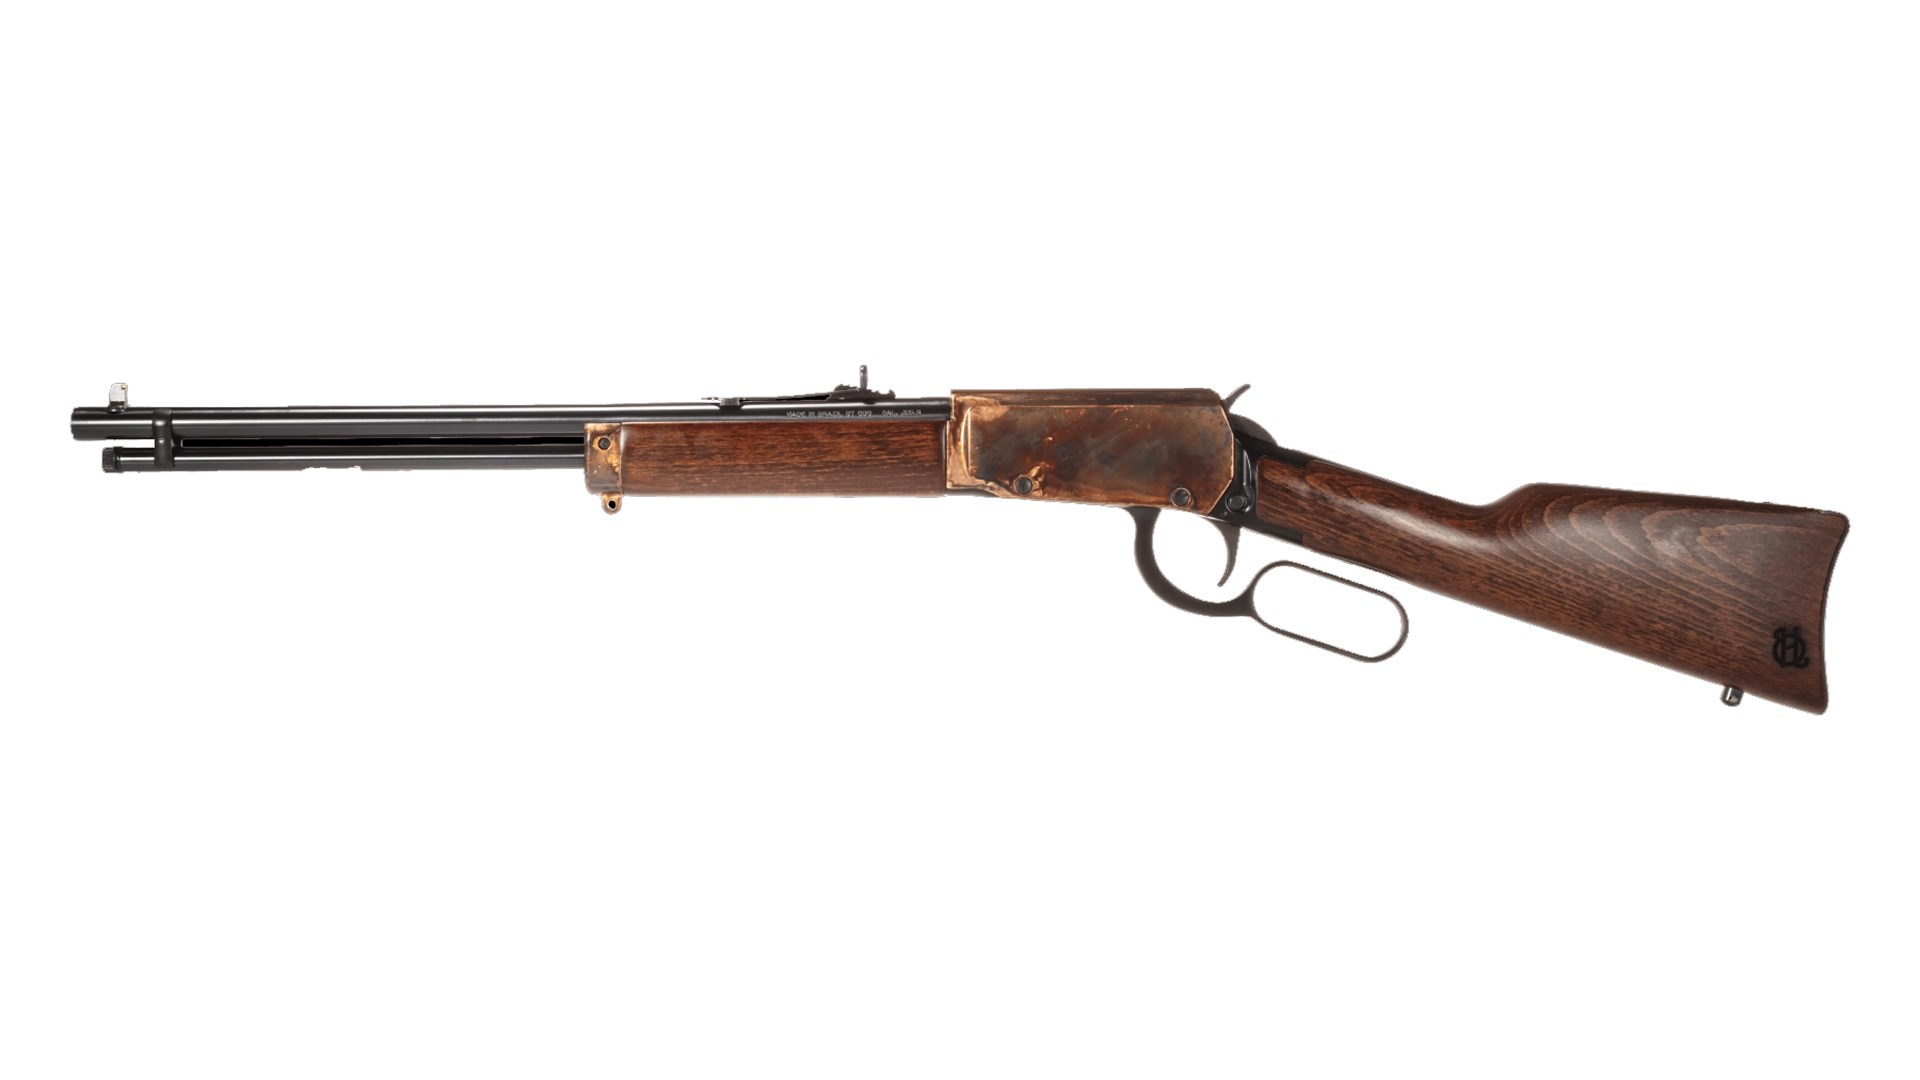 Heritage Settler Compact lever-action rifle's left side shown.